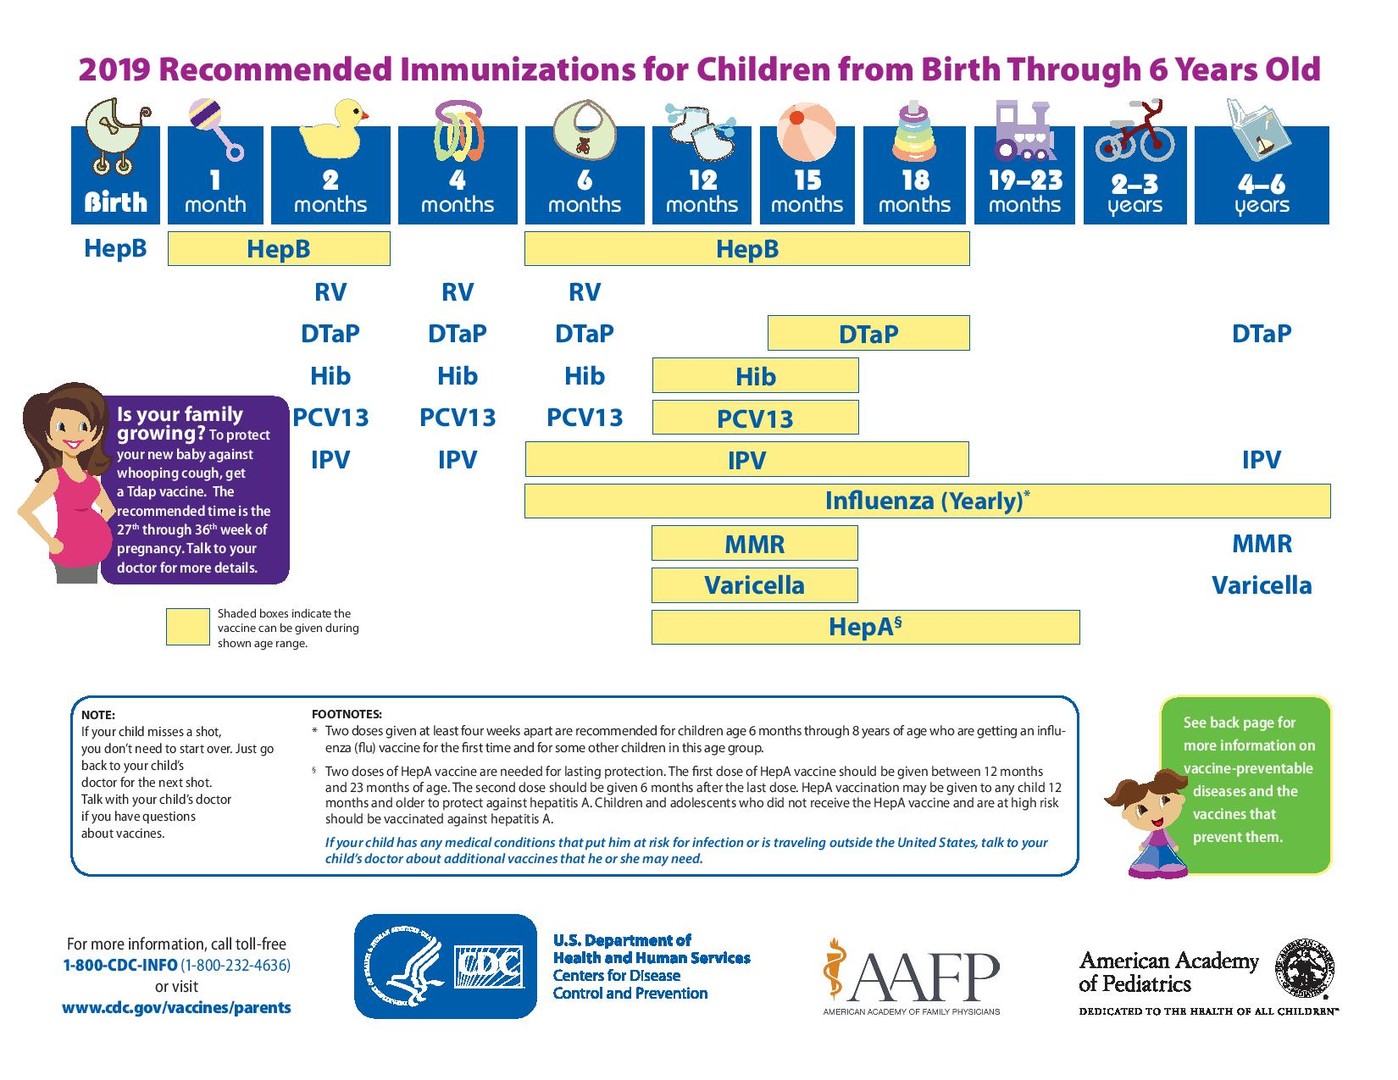 2019 Recommended Immunizations for Children from Birth Through 6 years old